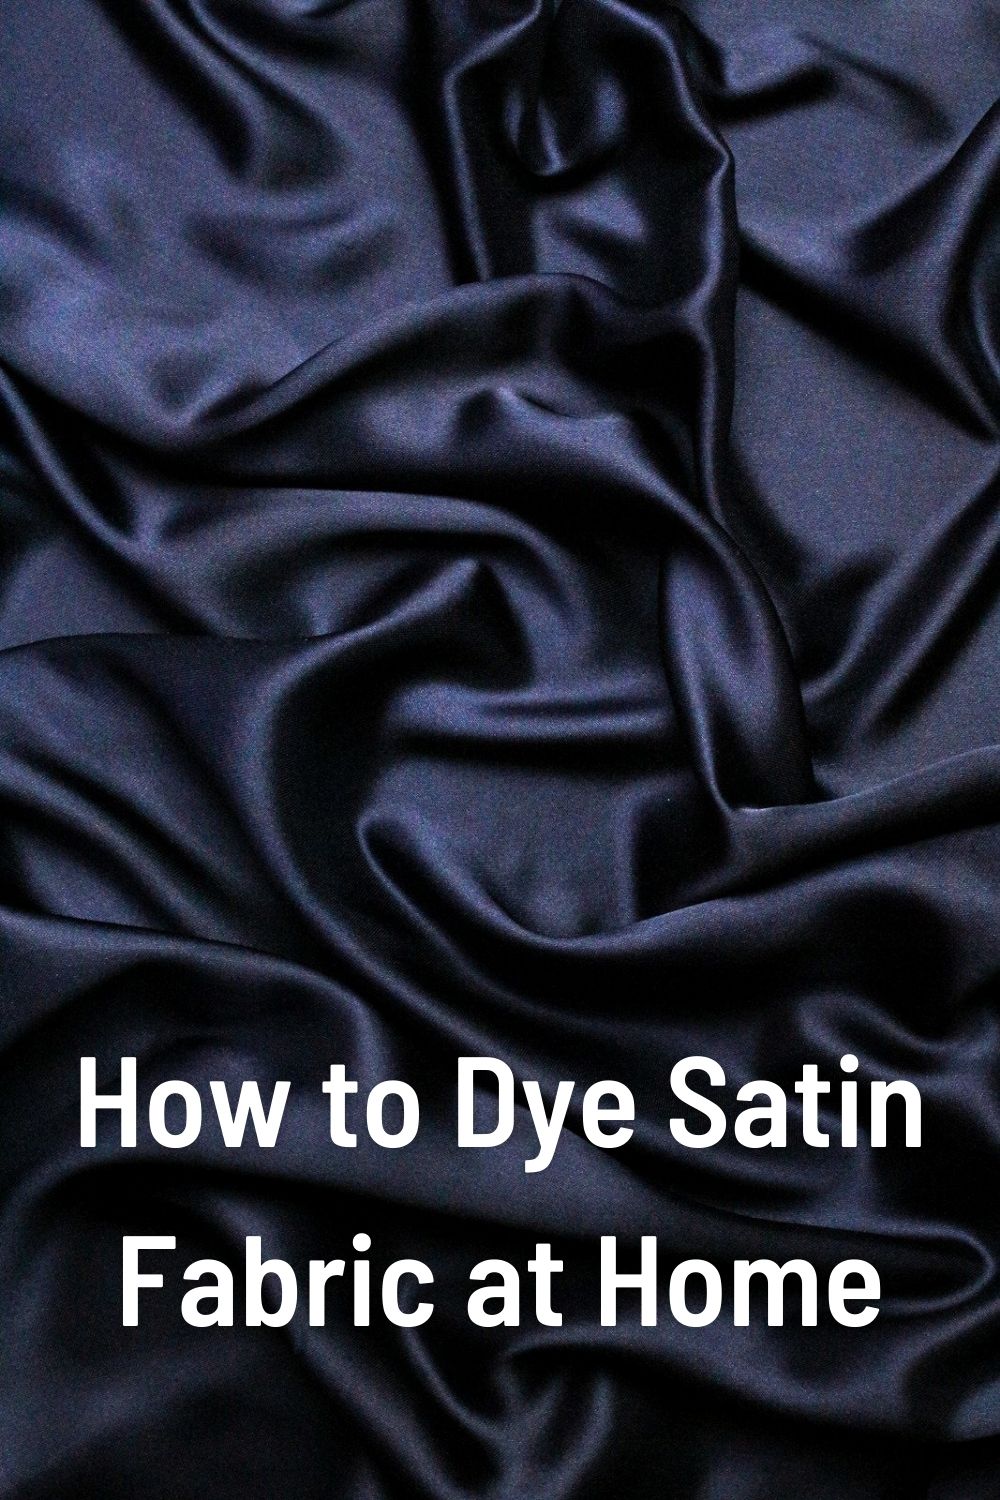 How to Dye Satin Fabric at Home